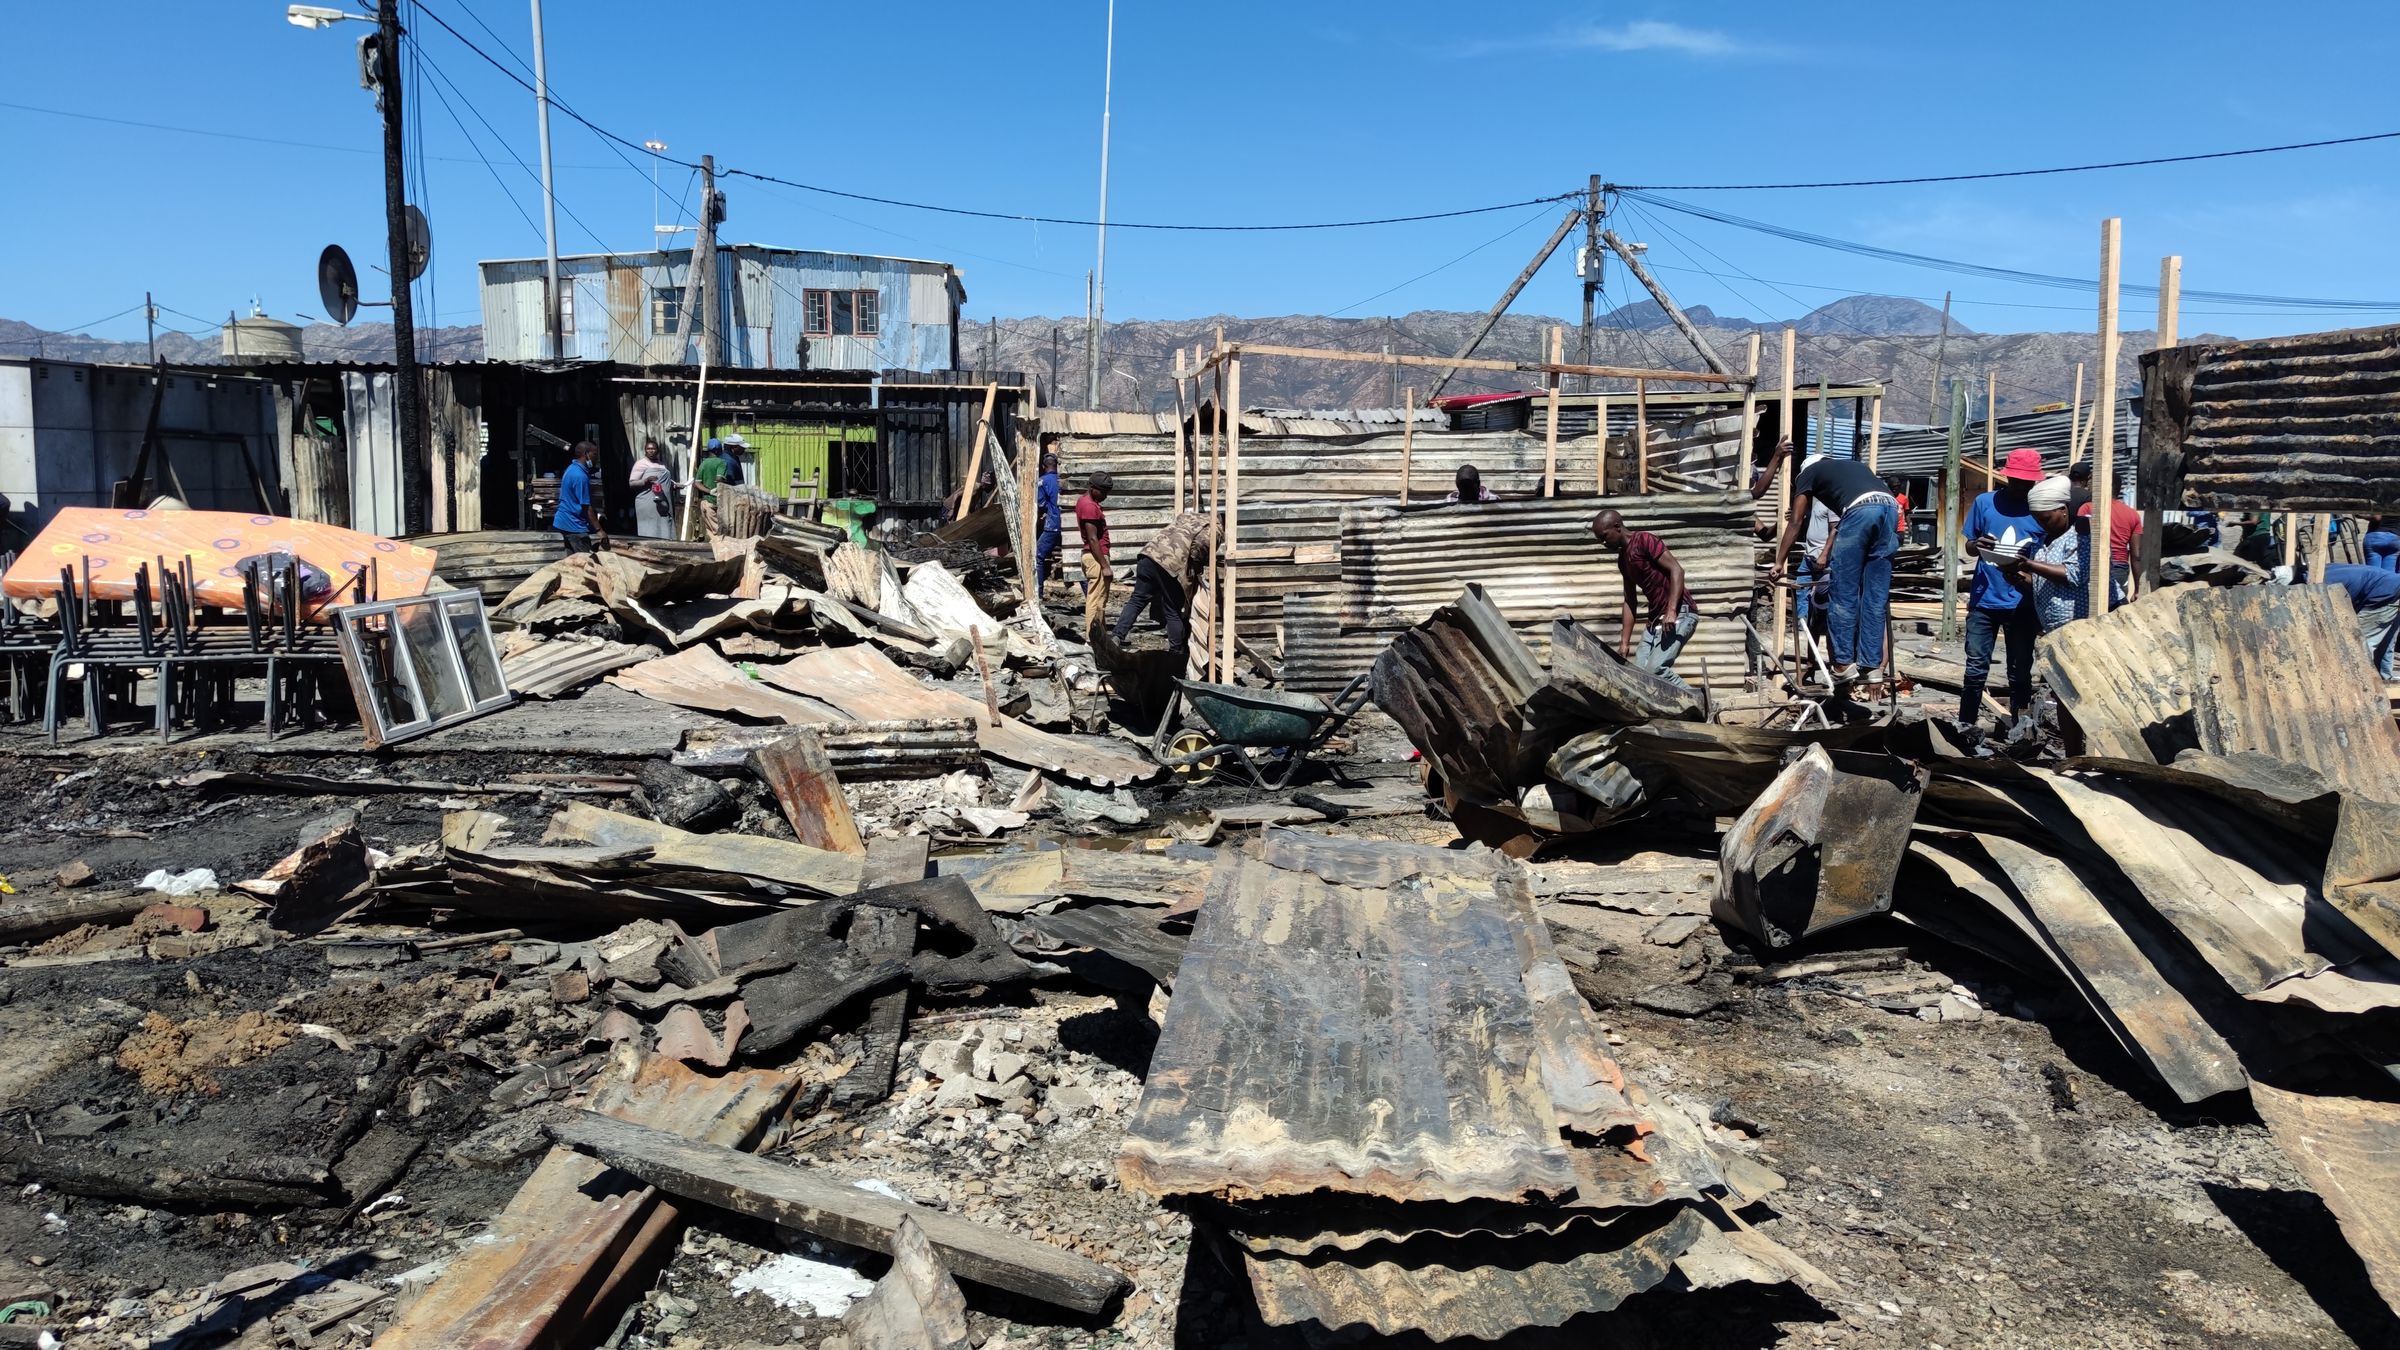 People cleaning up and rebuilding their houses after the fire in Nomzamo